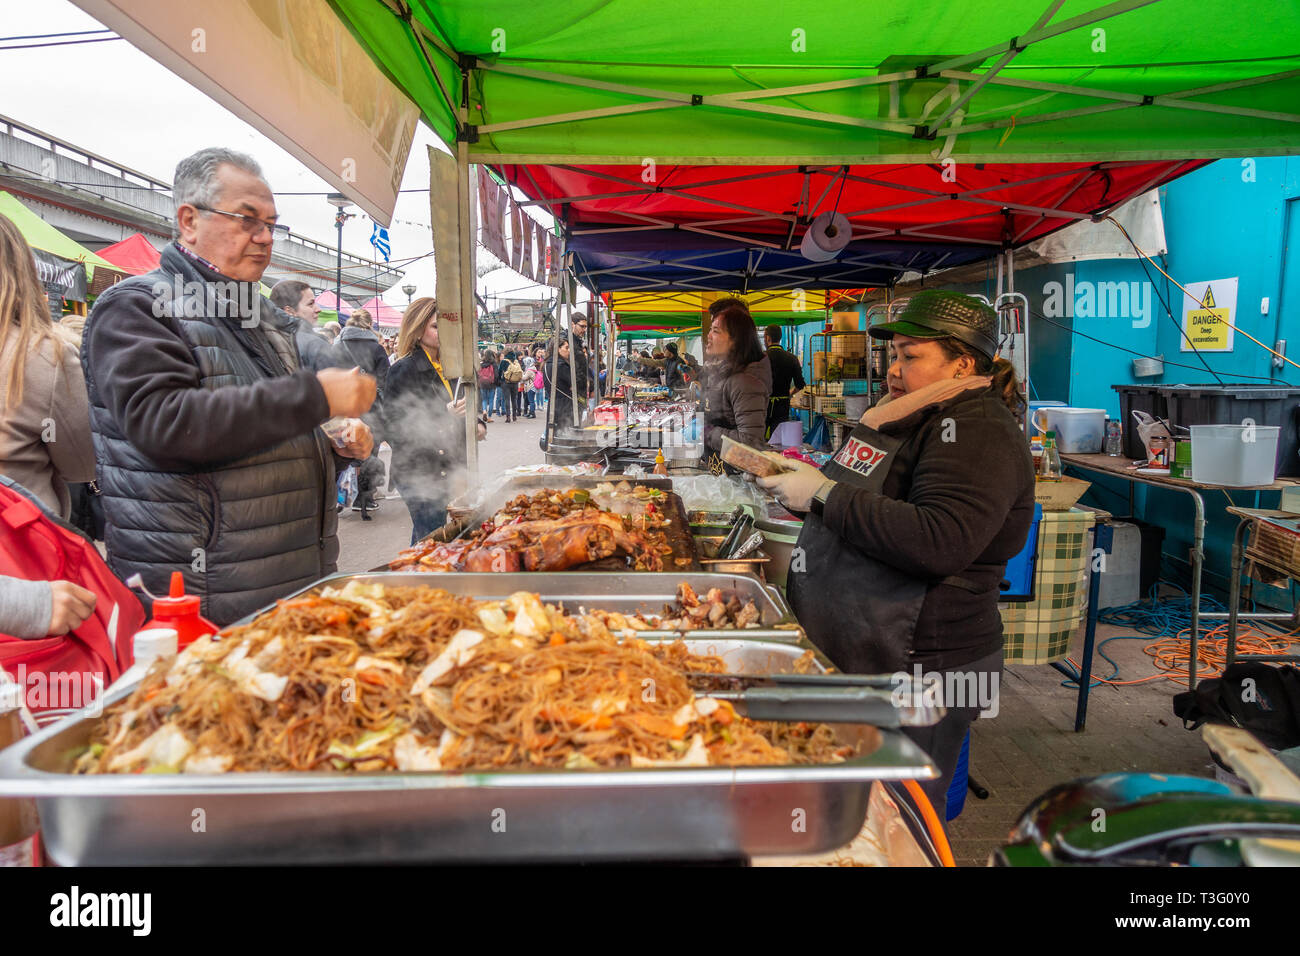 A man buys food from a street food vendor in Acklam Village on Portobello Road in Notting Hill, London, UK Stock Photo